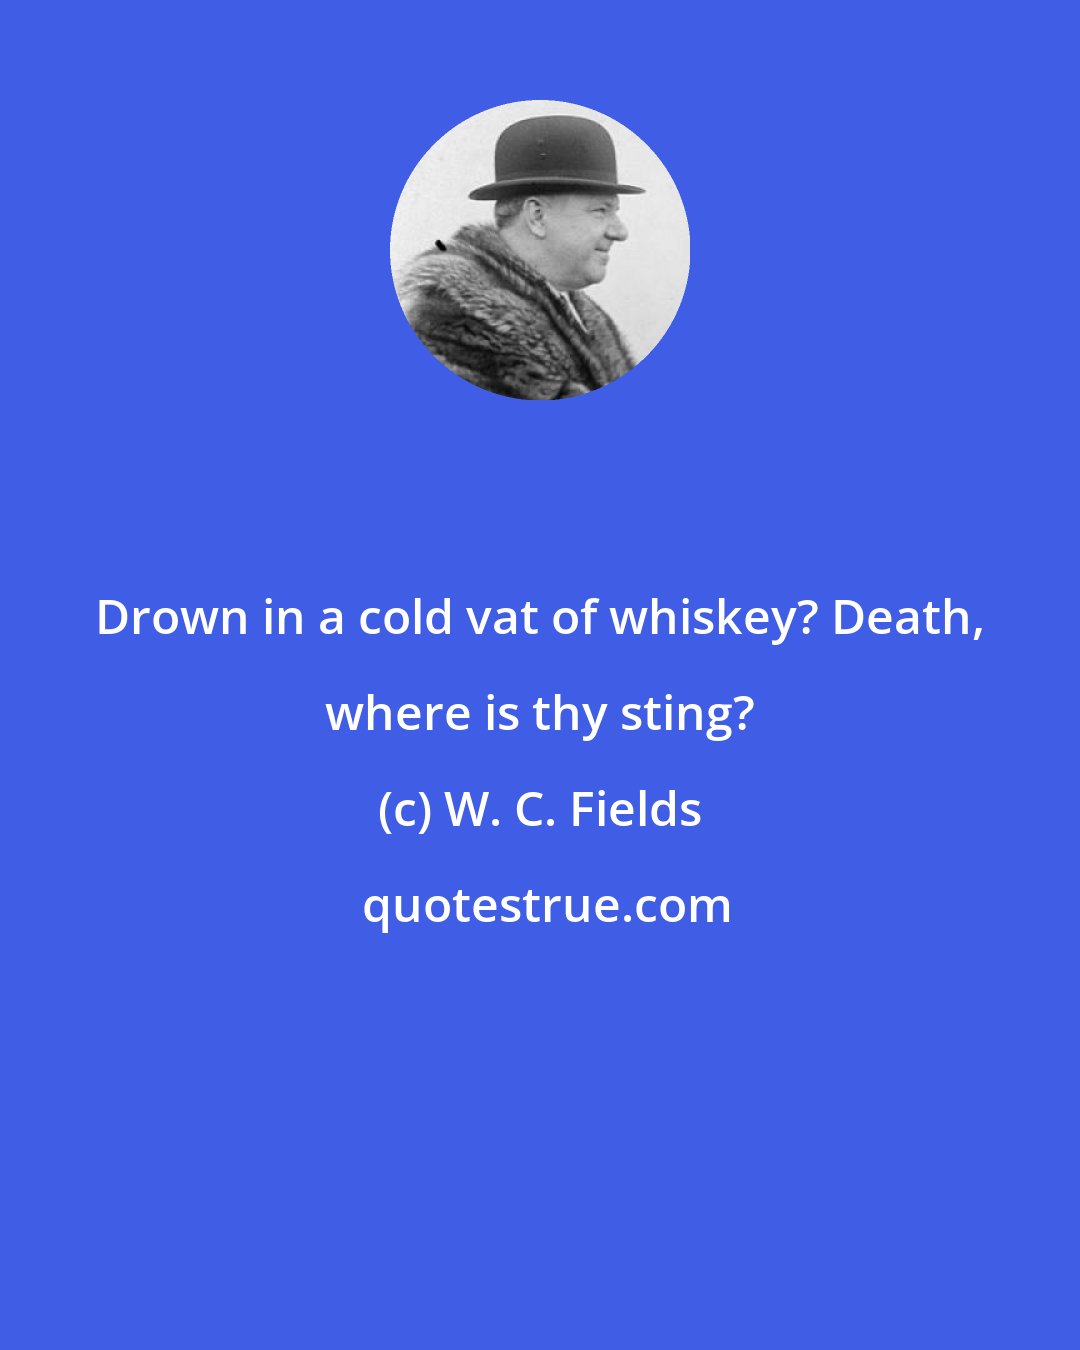 W. C. Fields: Drown in a cold vat of whiskey? Death, where is thy sting?